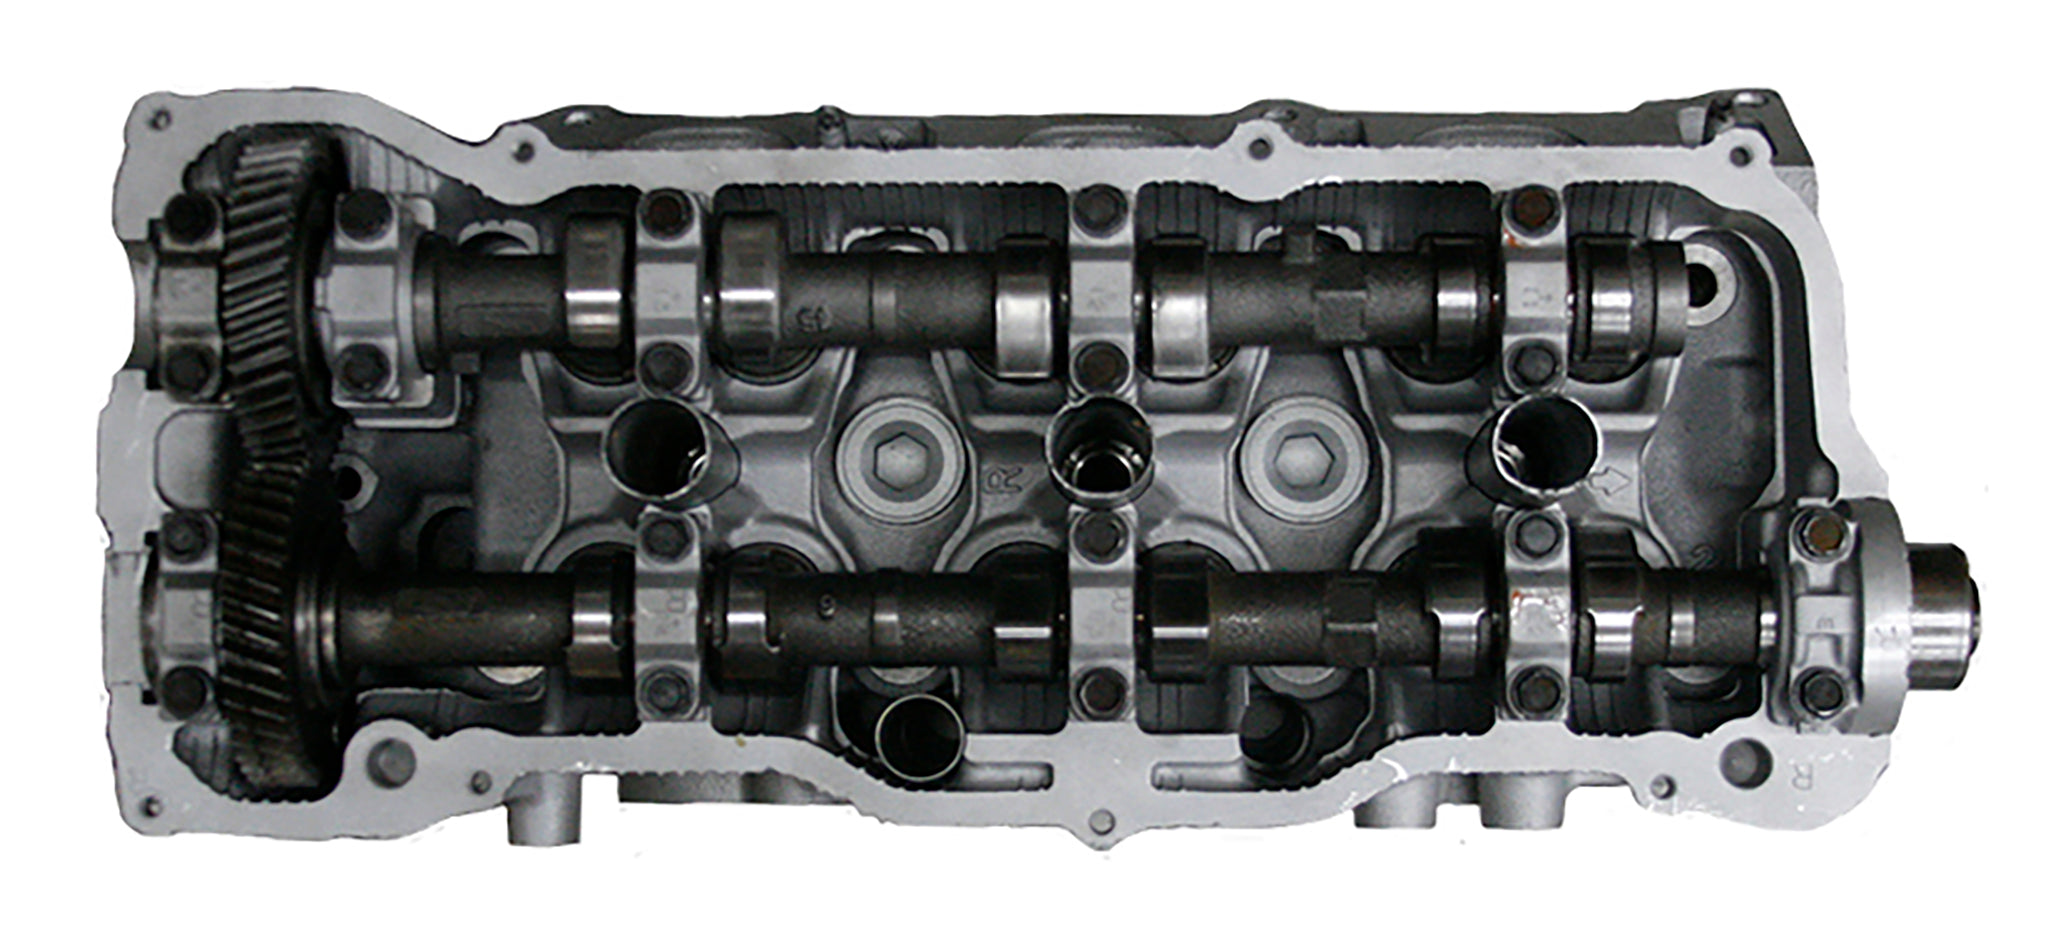 1994-1997 Toyota Camry Avalon 3.0L DOHC Right Cylinder Head Casting # 1MZFE